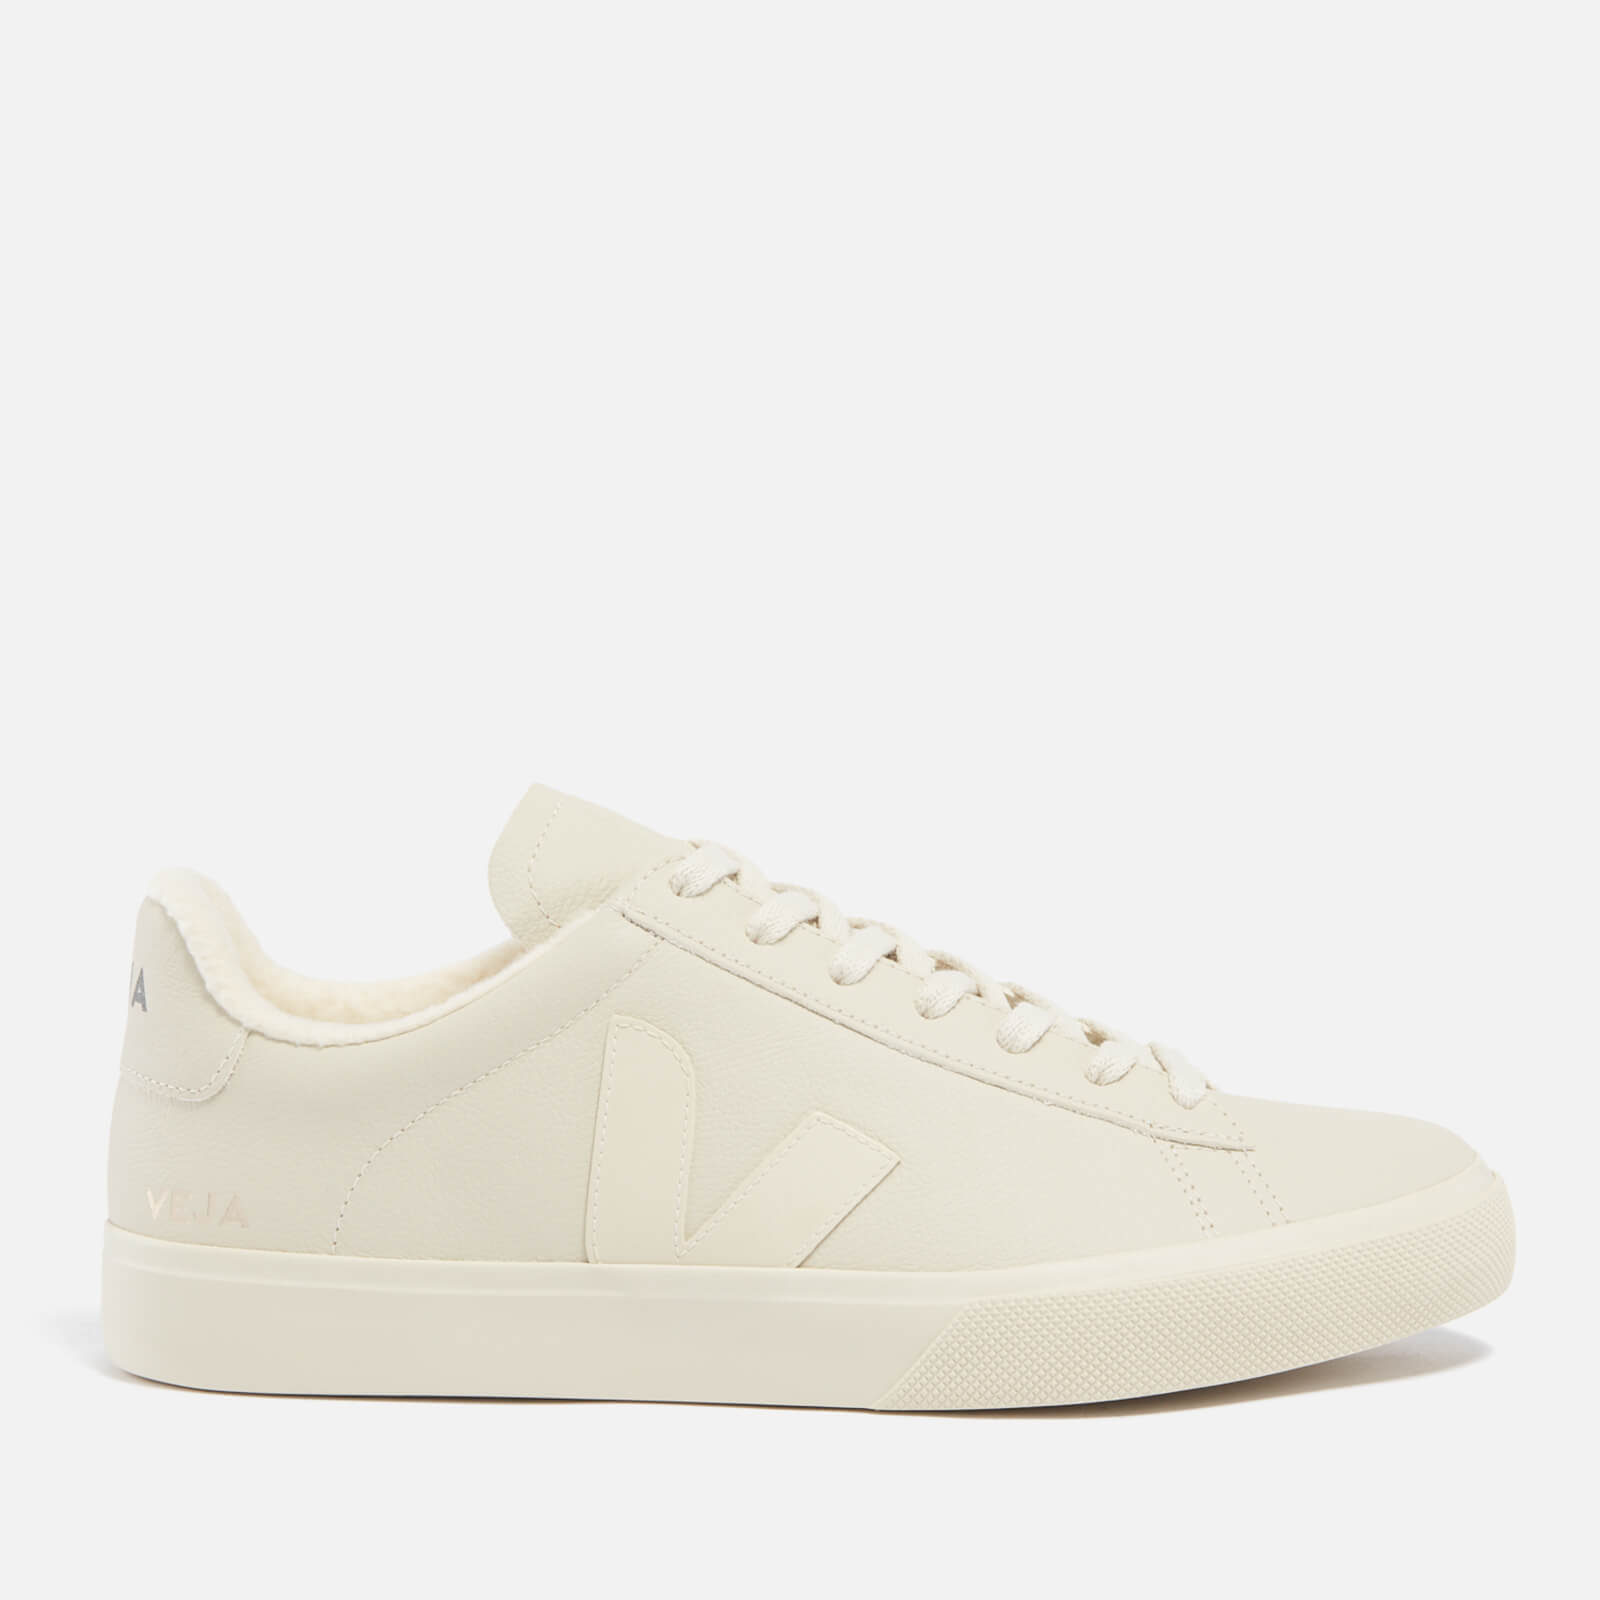 Veja Men’s Campo Leather Trainers